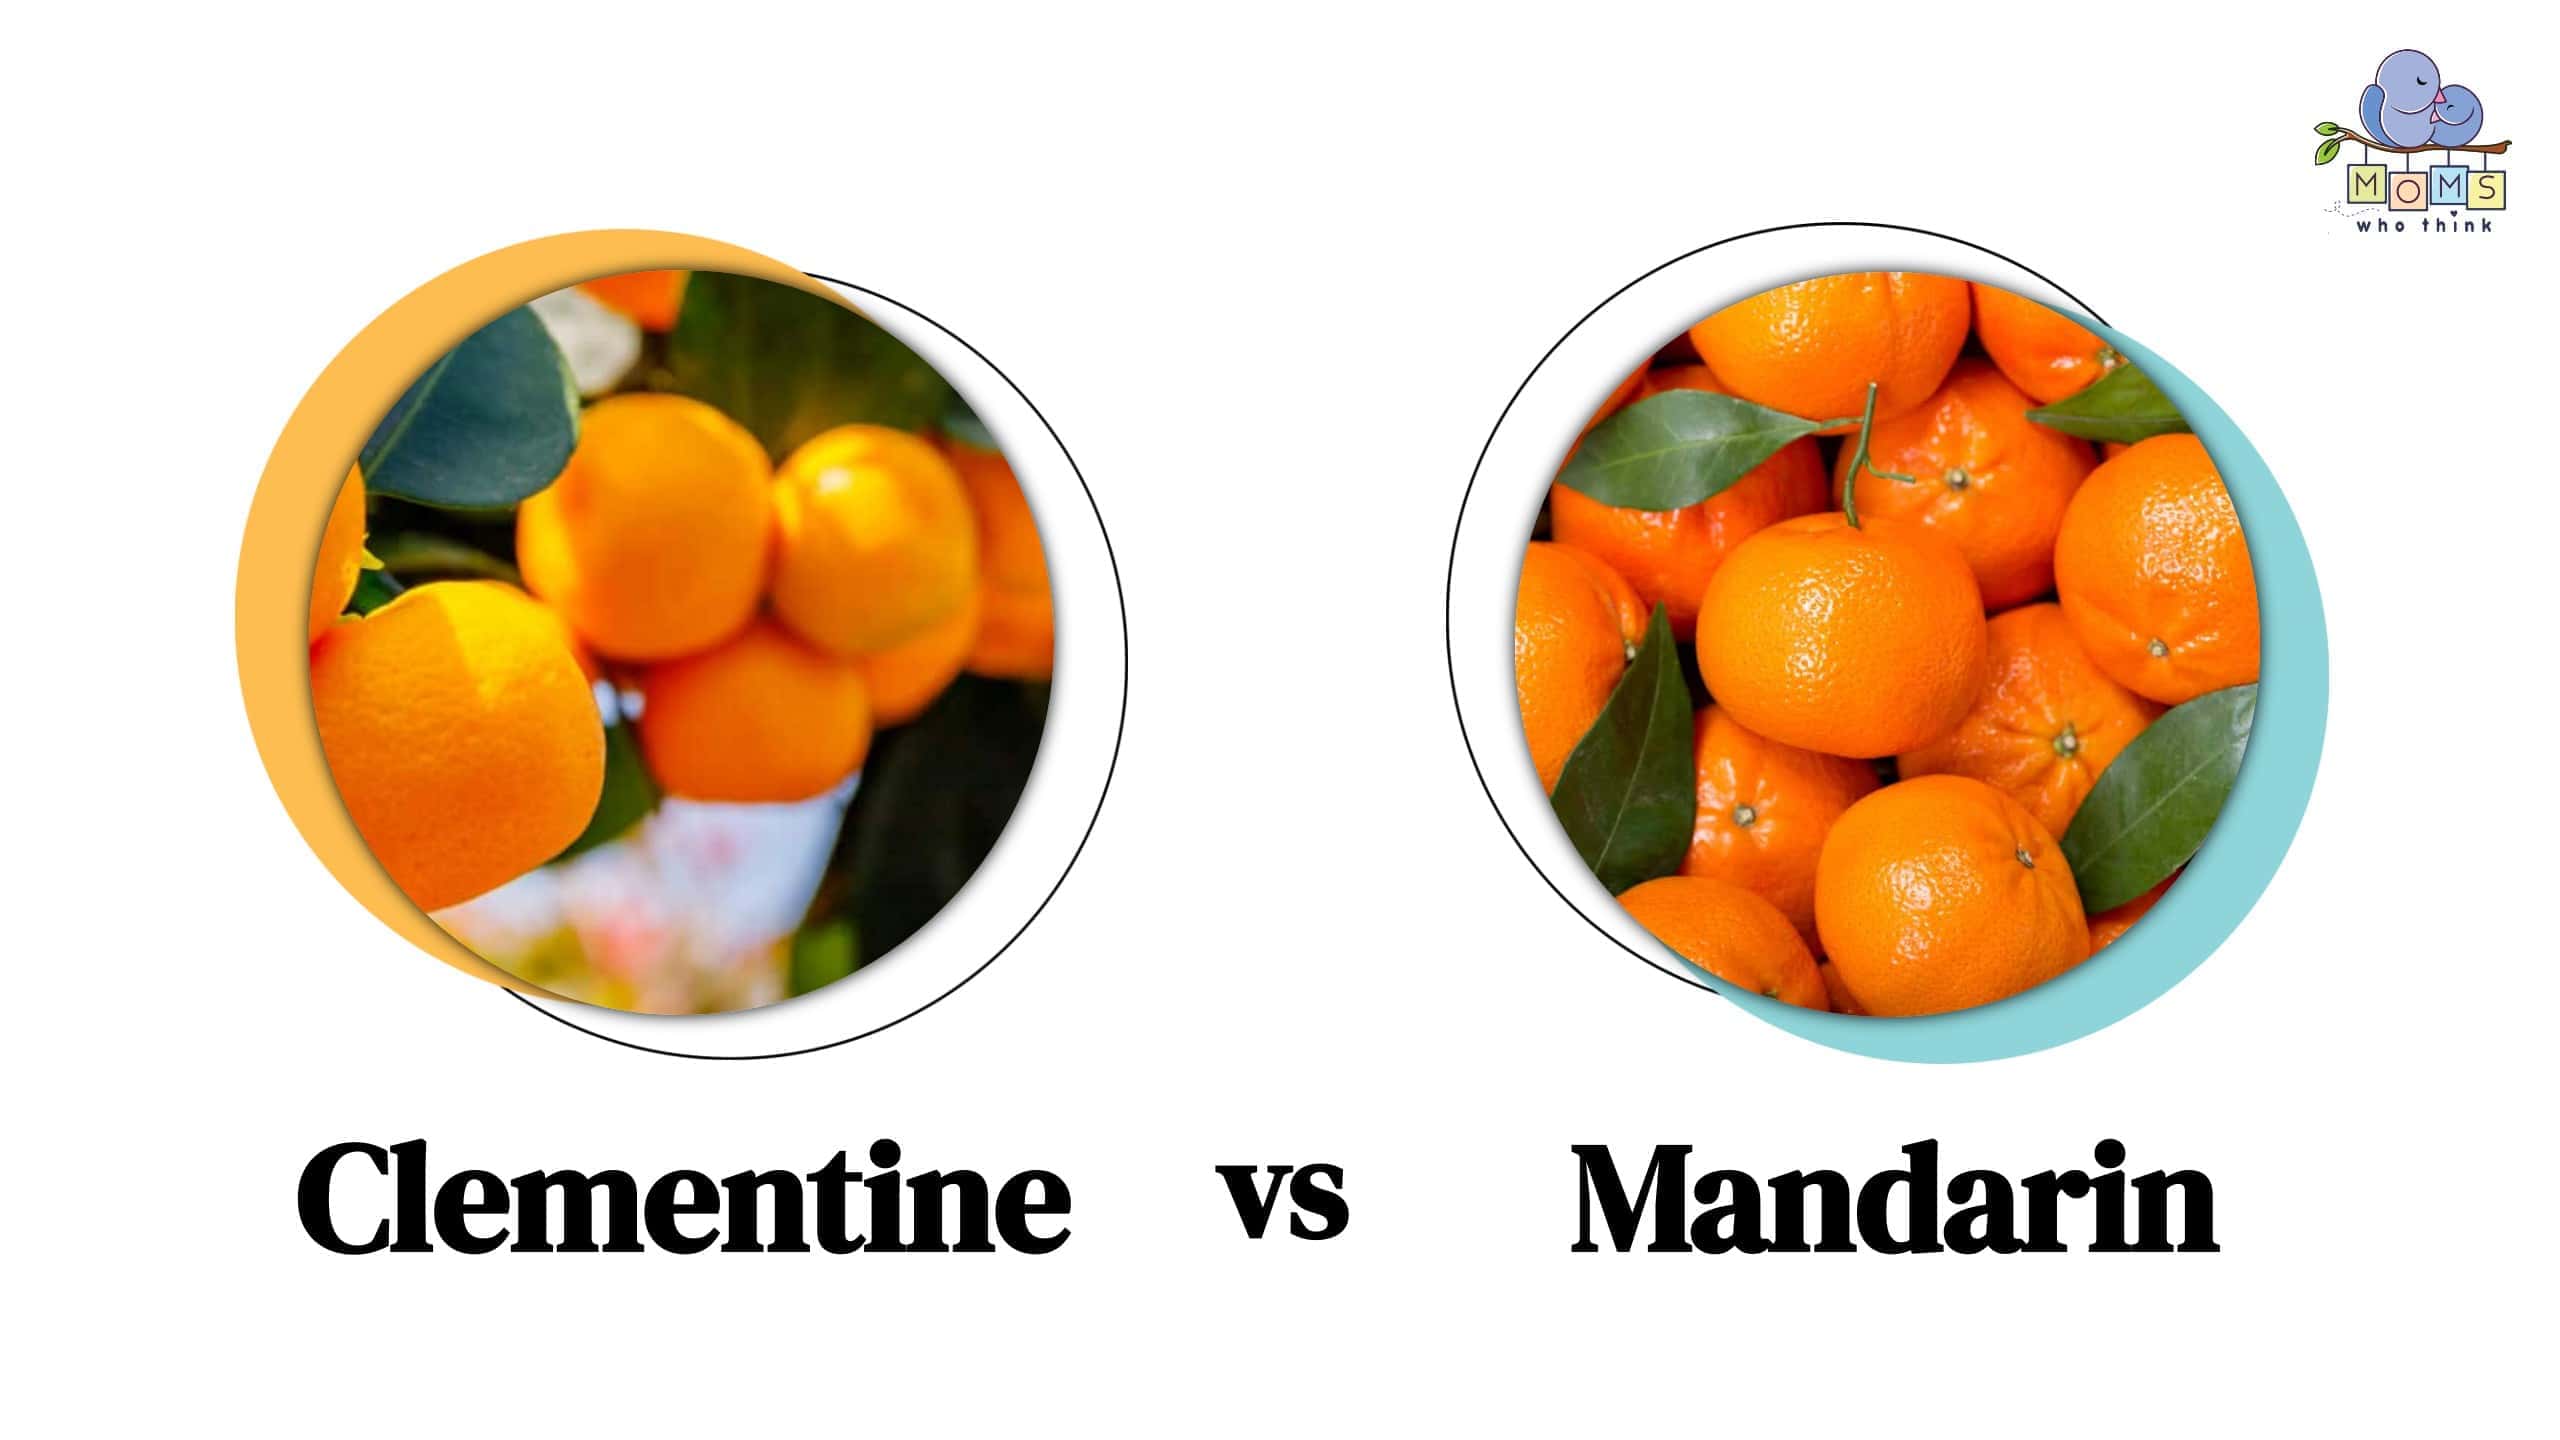 Tangerine vs. Clementine: What's the Difference?